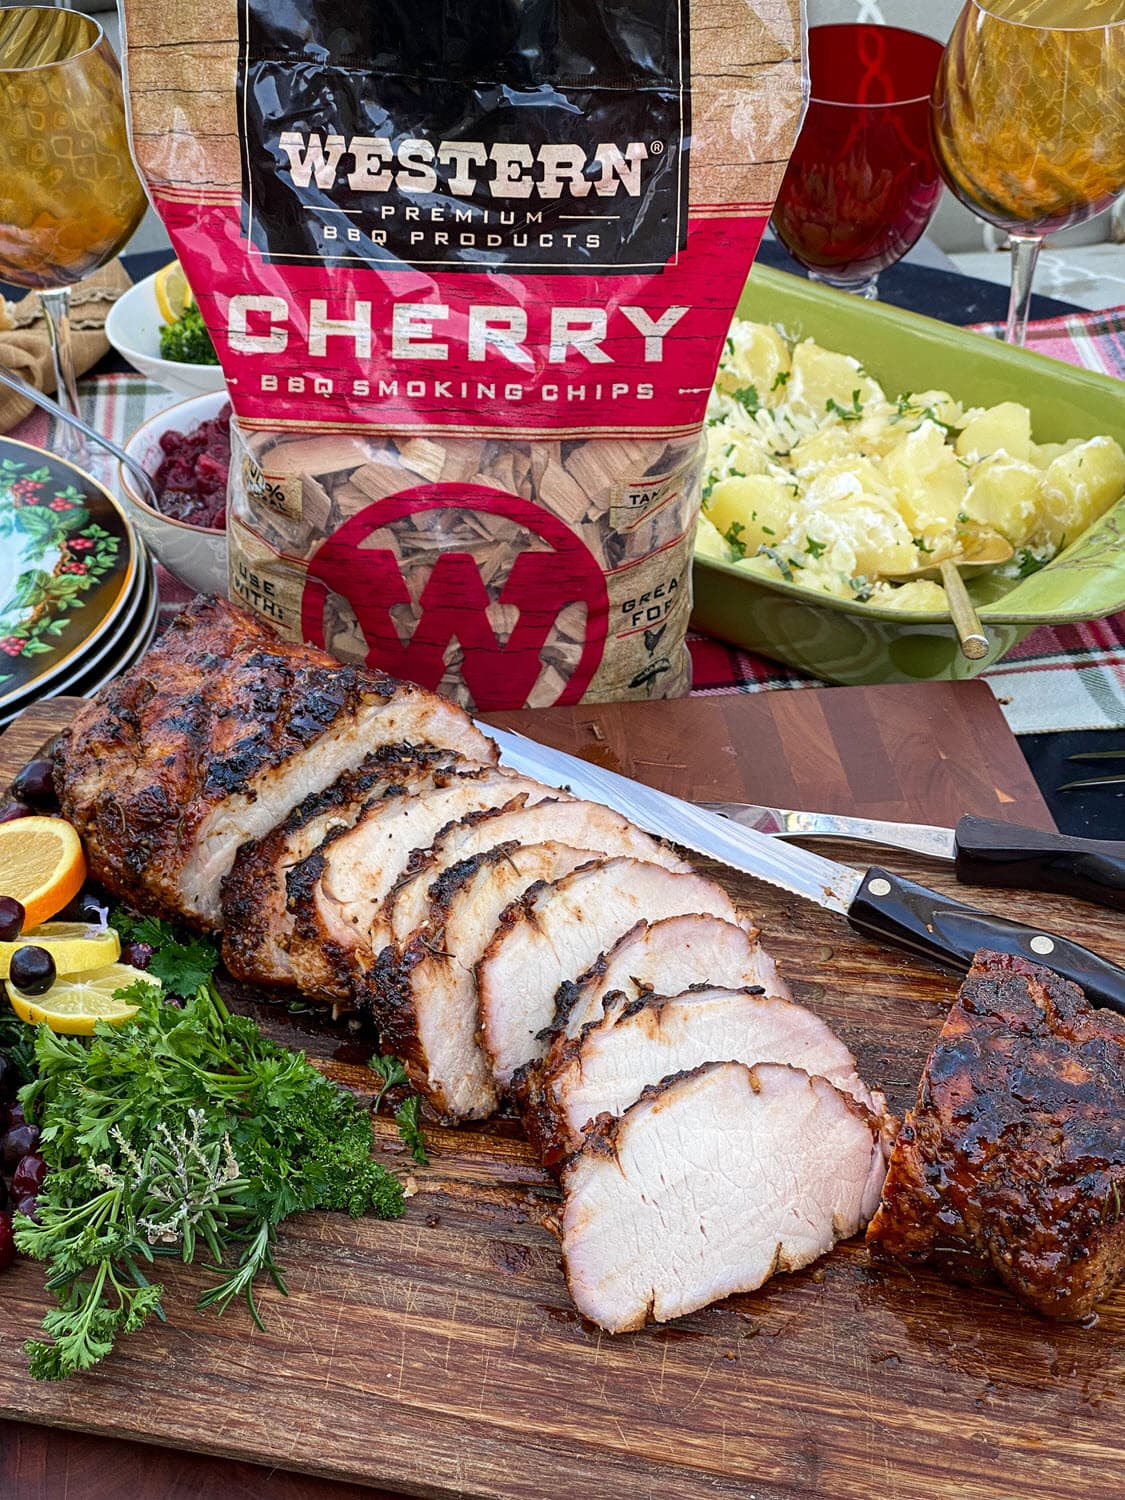 Pork loin sliced on board with garnish and cherry chips bag in background